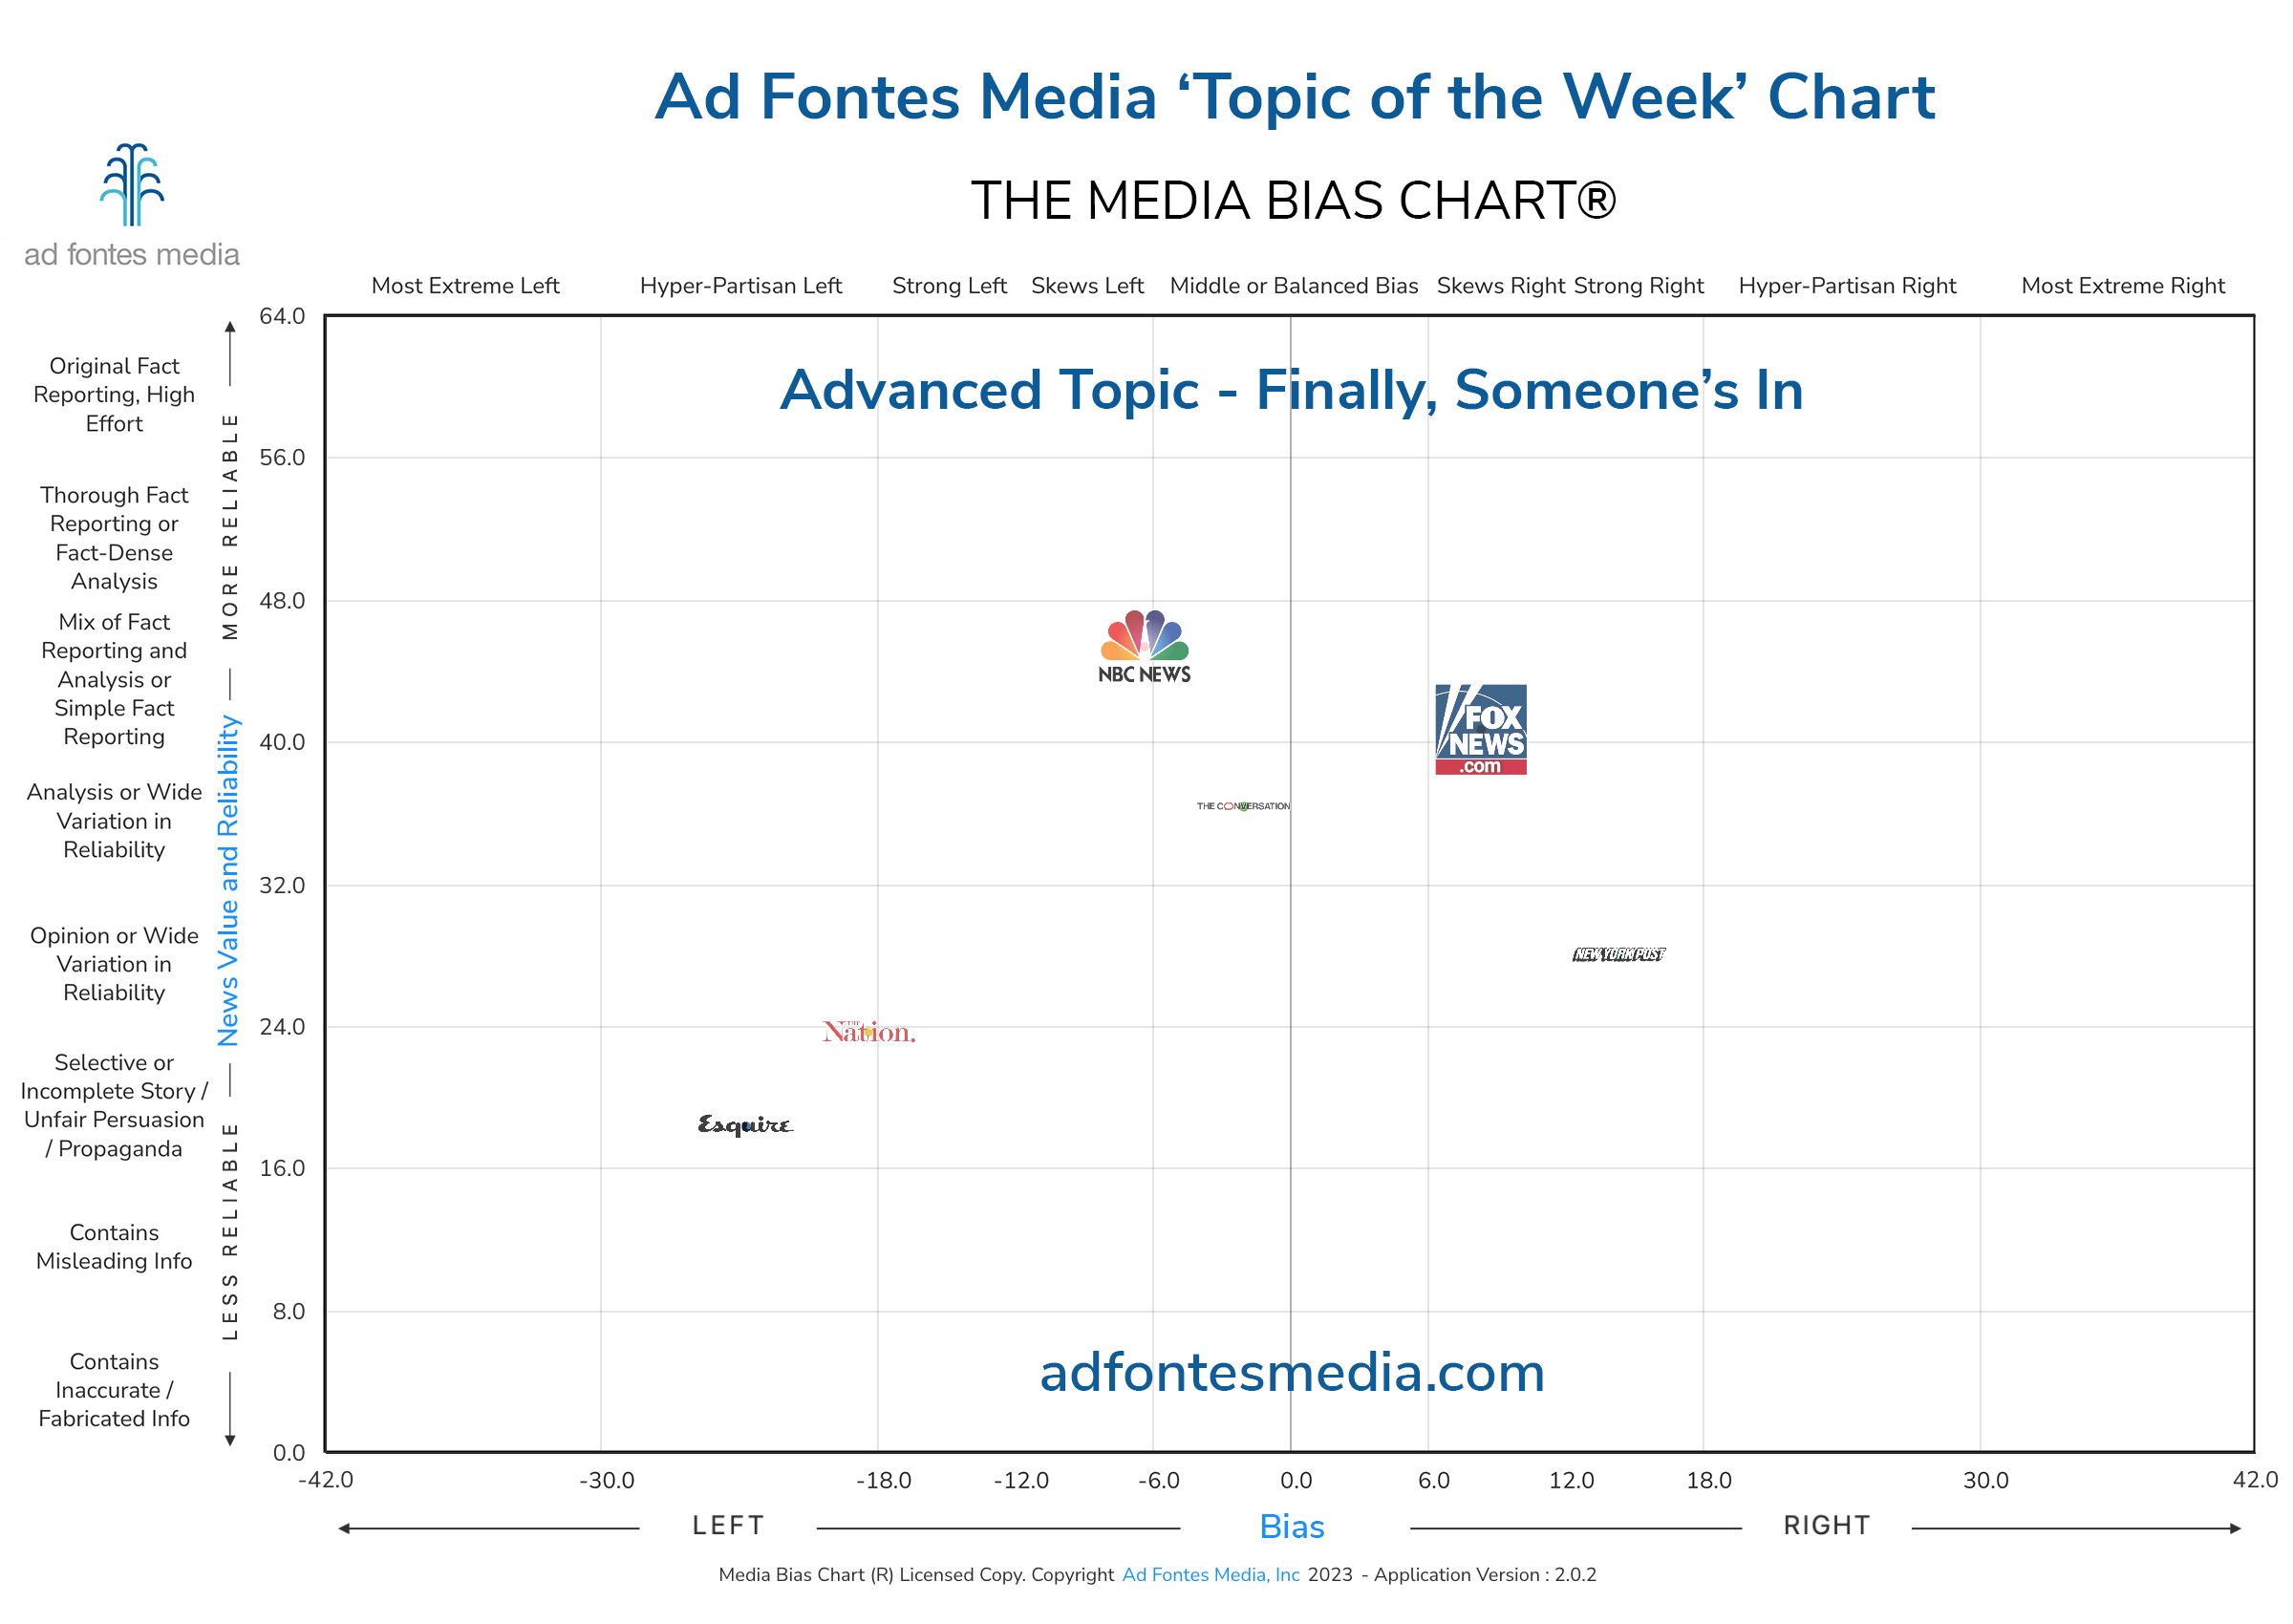 Media Bias Chart Explores Divergent News Coverage of New House Speaker Mike Johnson’s Election